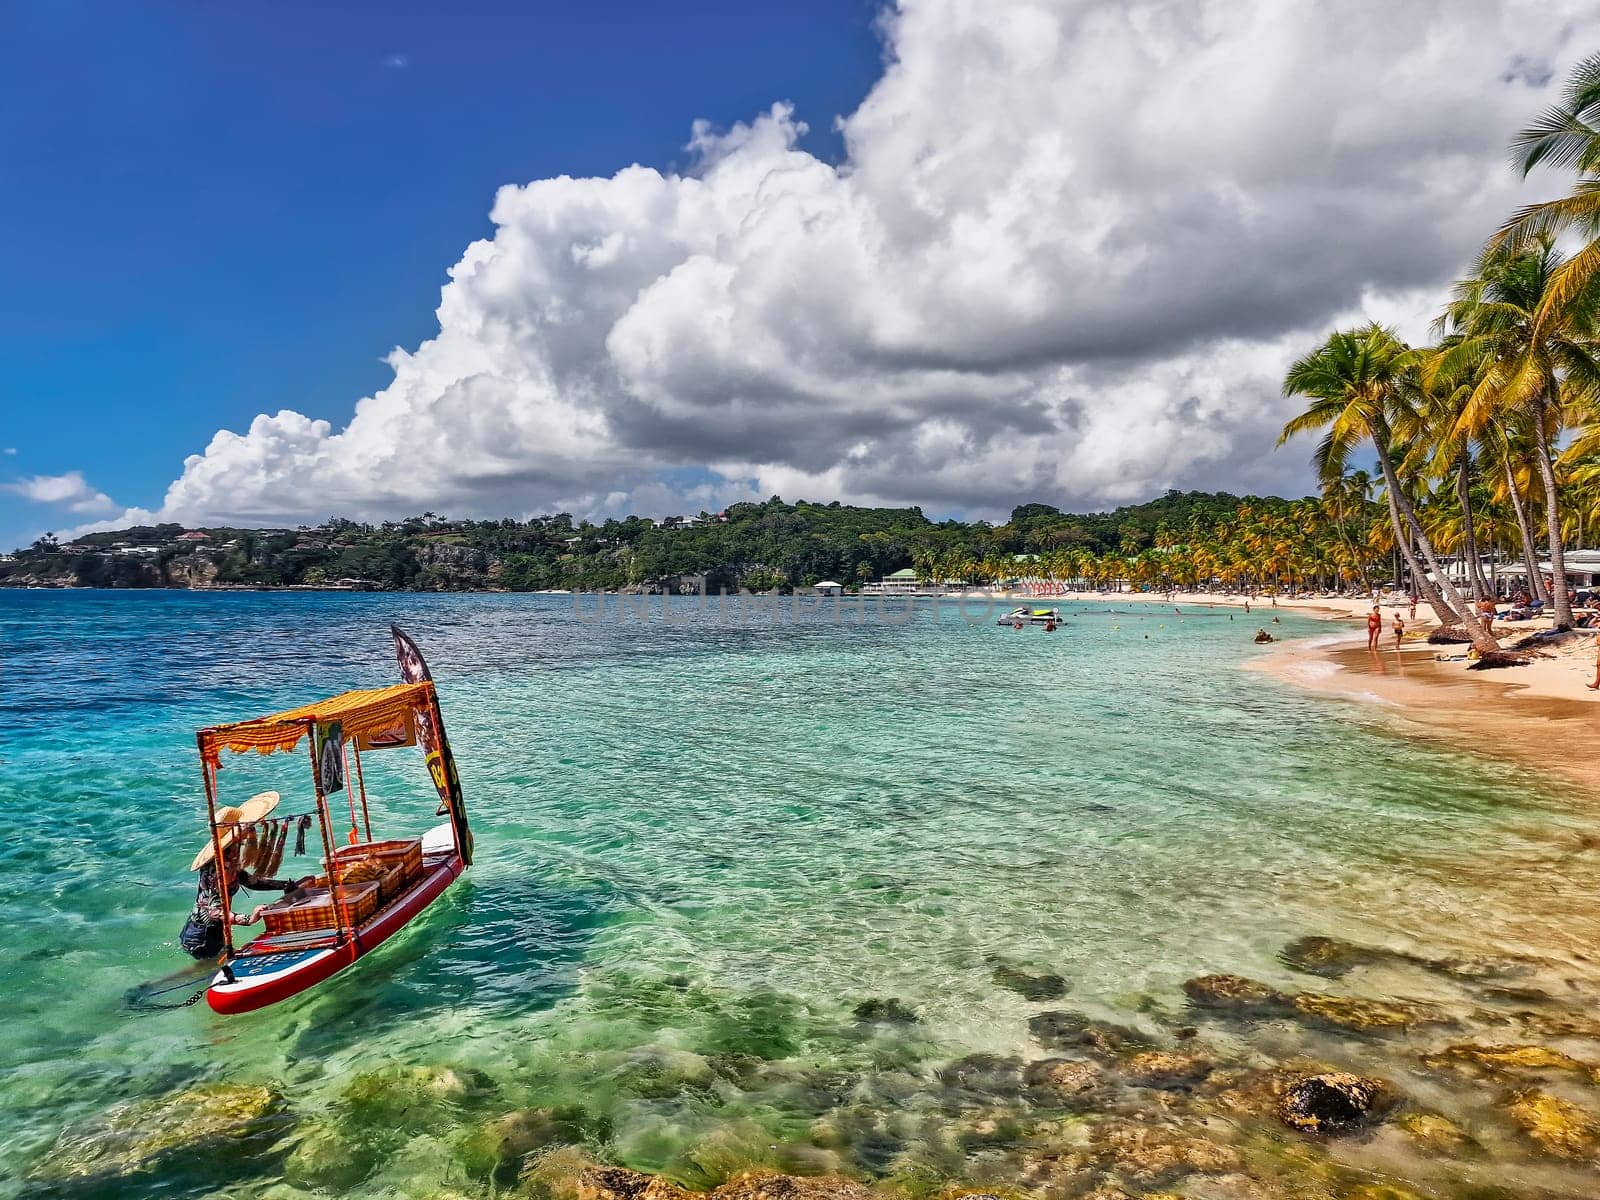 Caribbean island where visitors are served drinks from a small beach boat